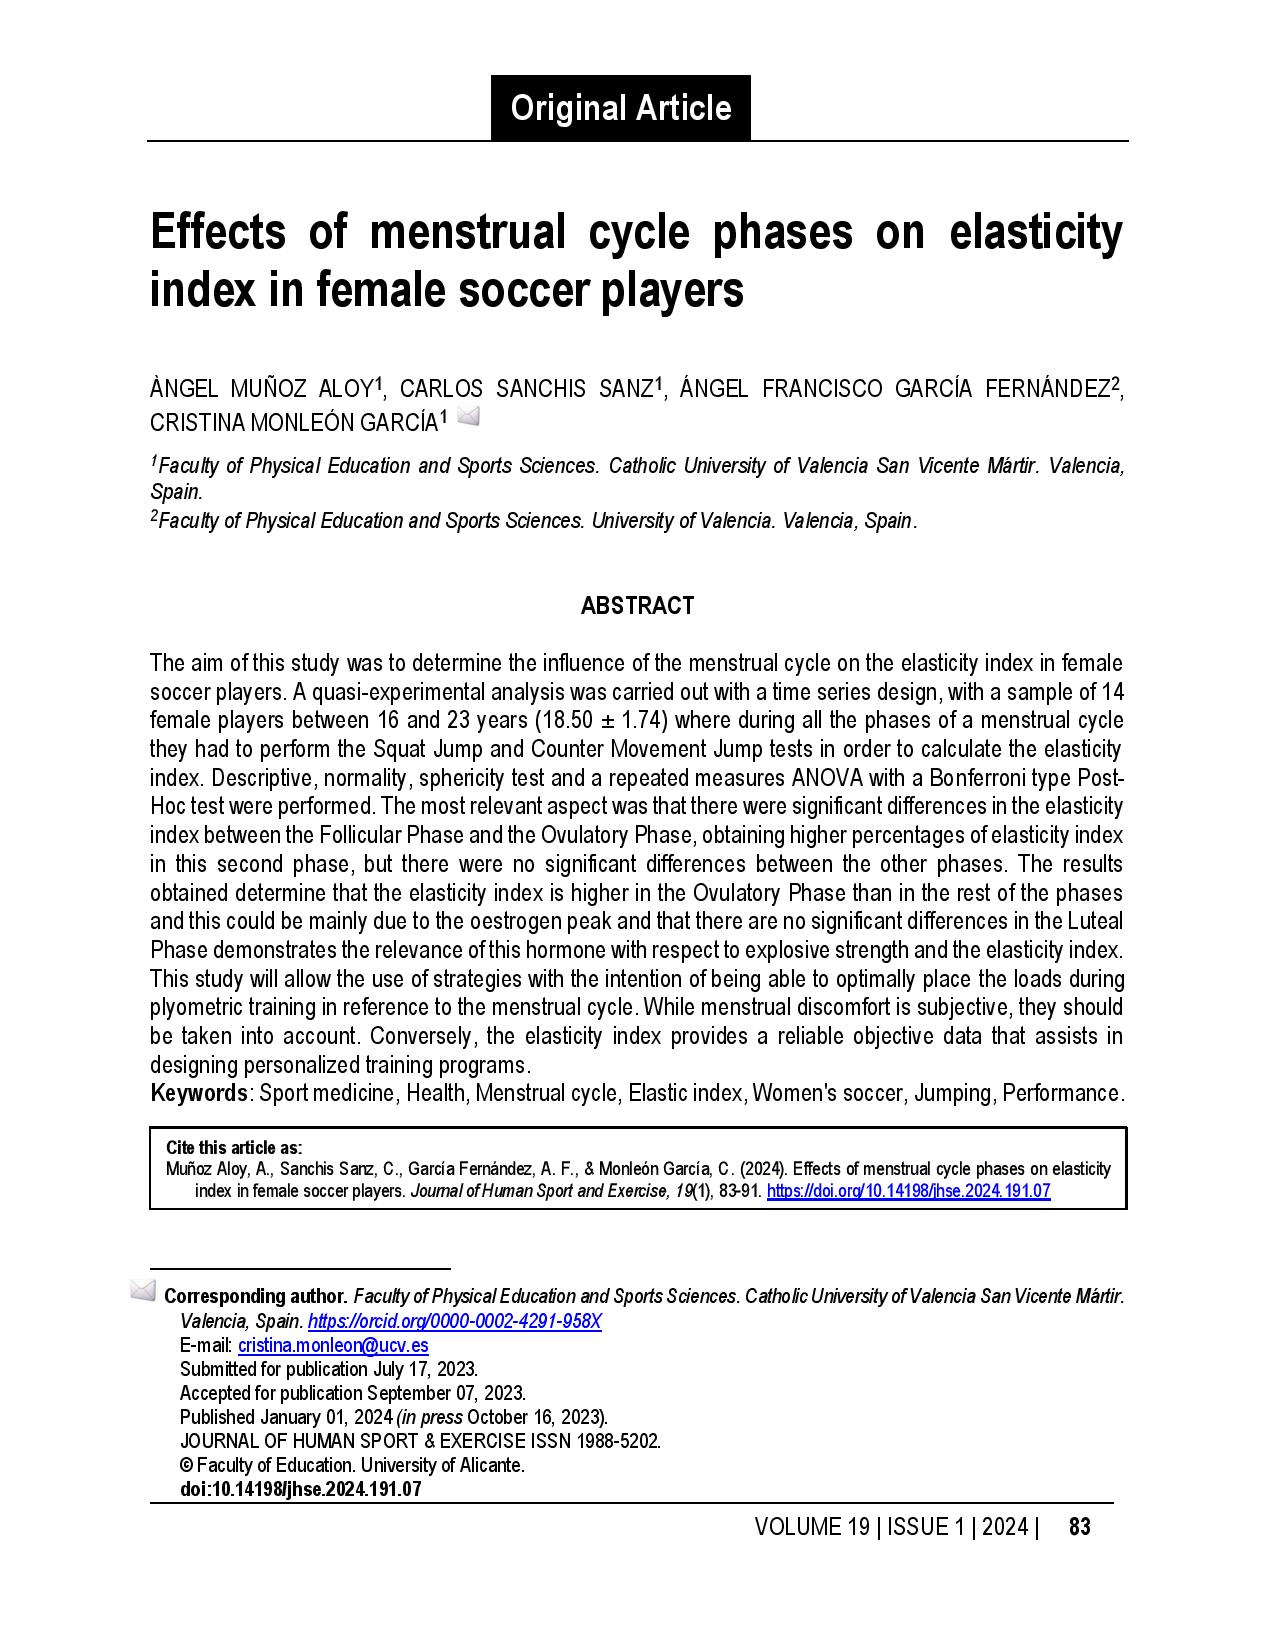 Effects of menstrual cycle phases on elasticity index in female soccer players